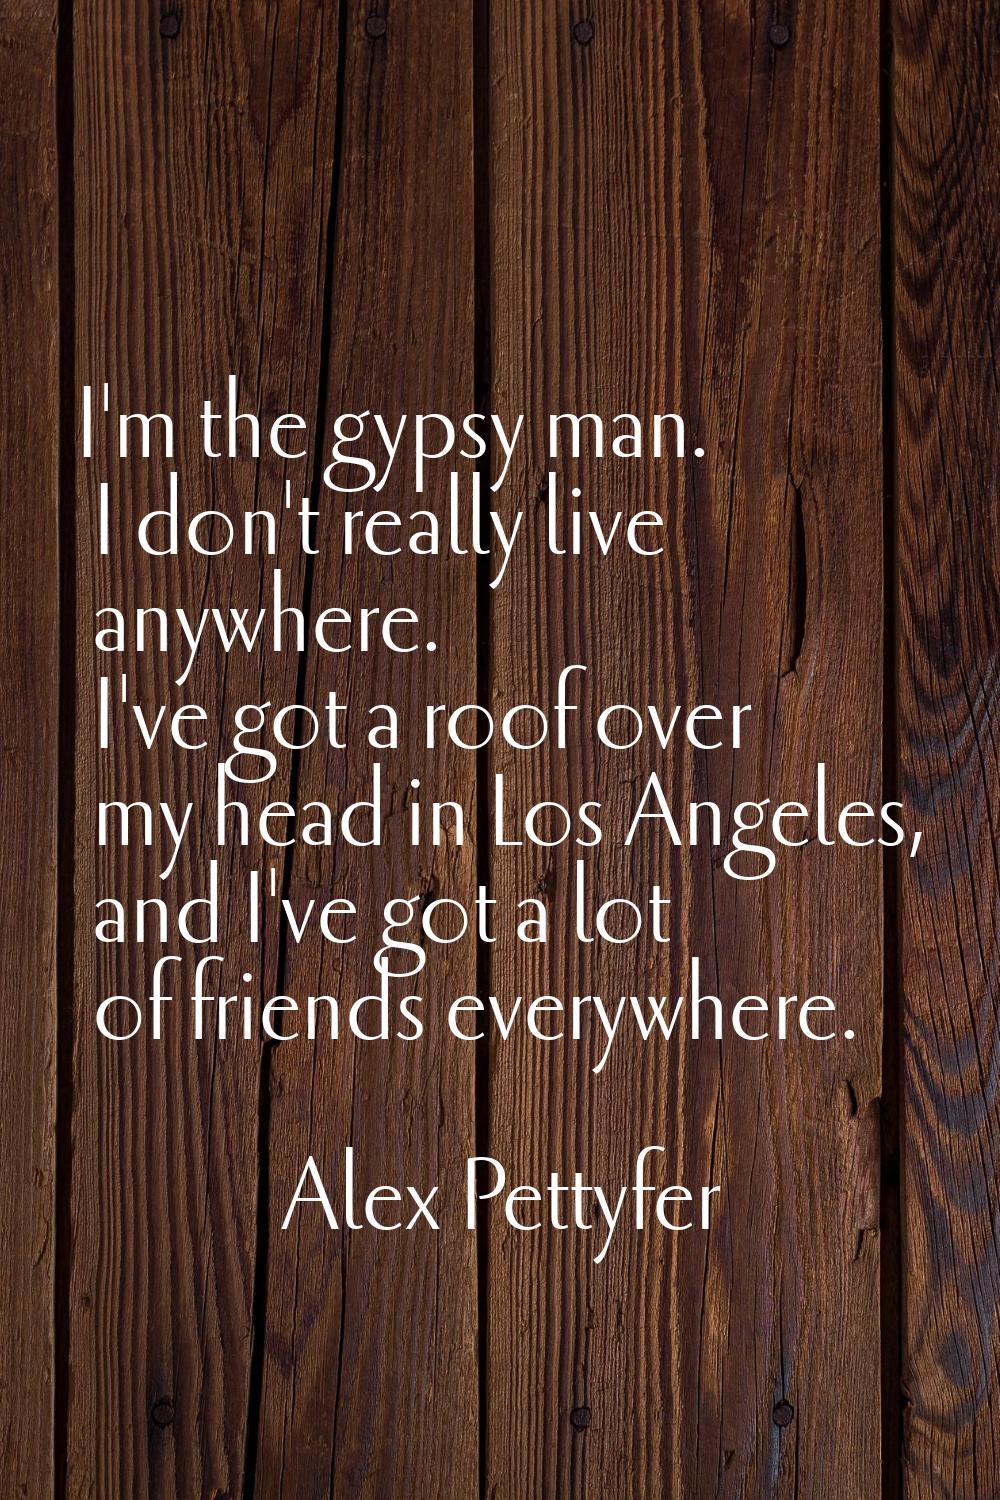 I'm the gypsy man. I don't really live anywhere. I've got a roof over my head in Los Angeles, and I